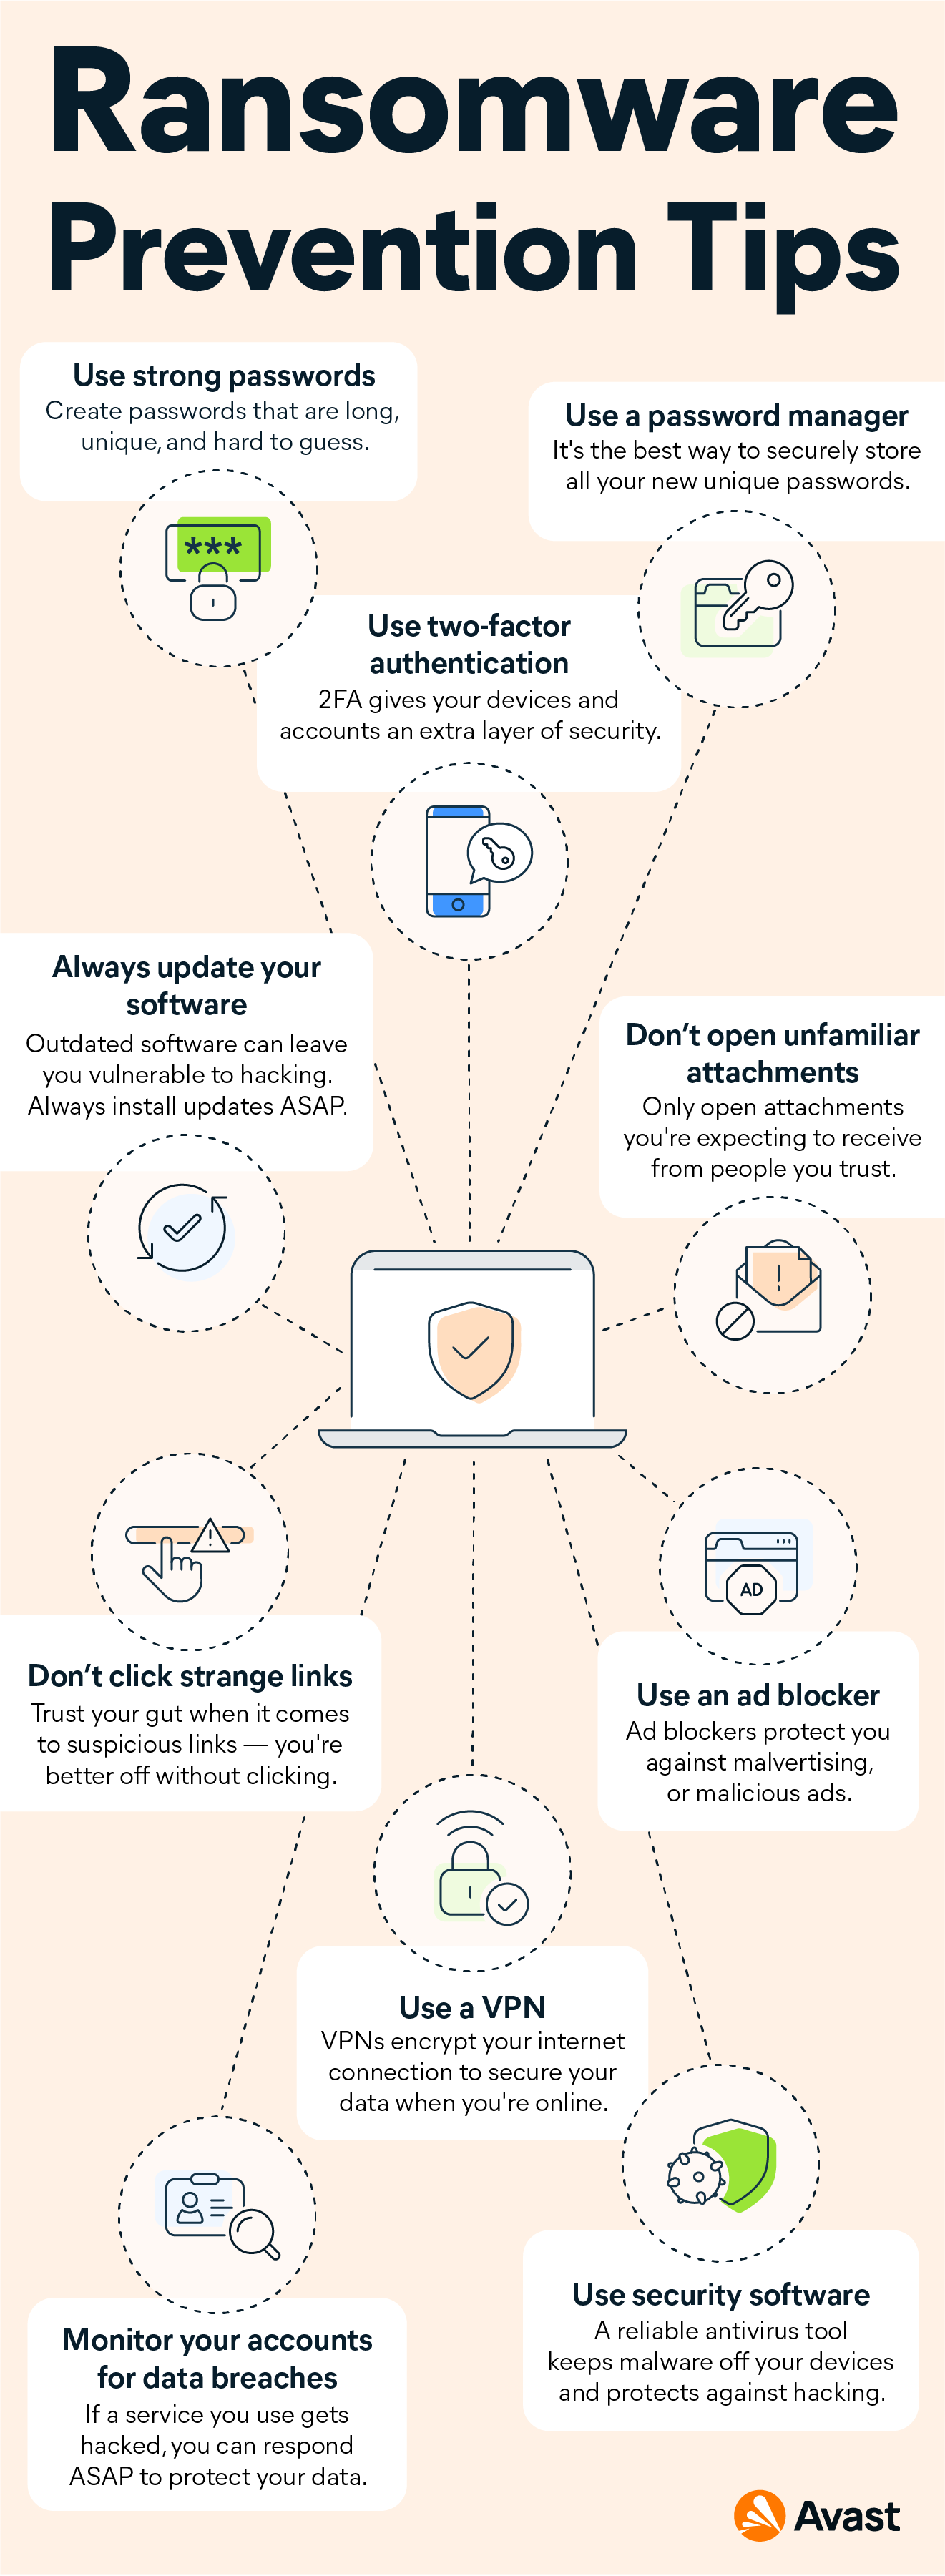 Ransomware prevention tips to help you avoid becoming the victim of an attack.